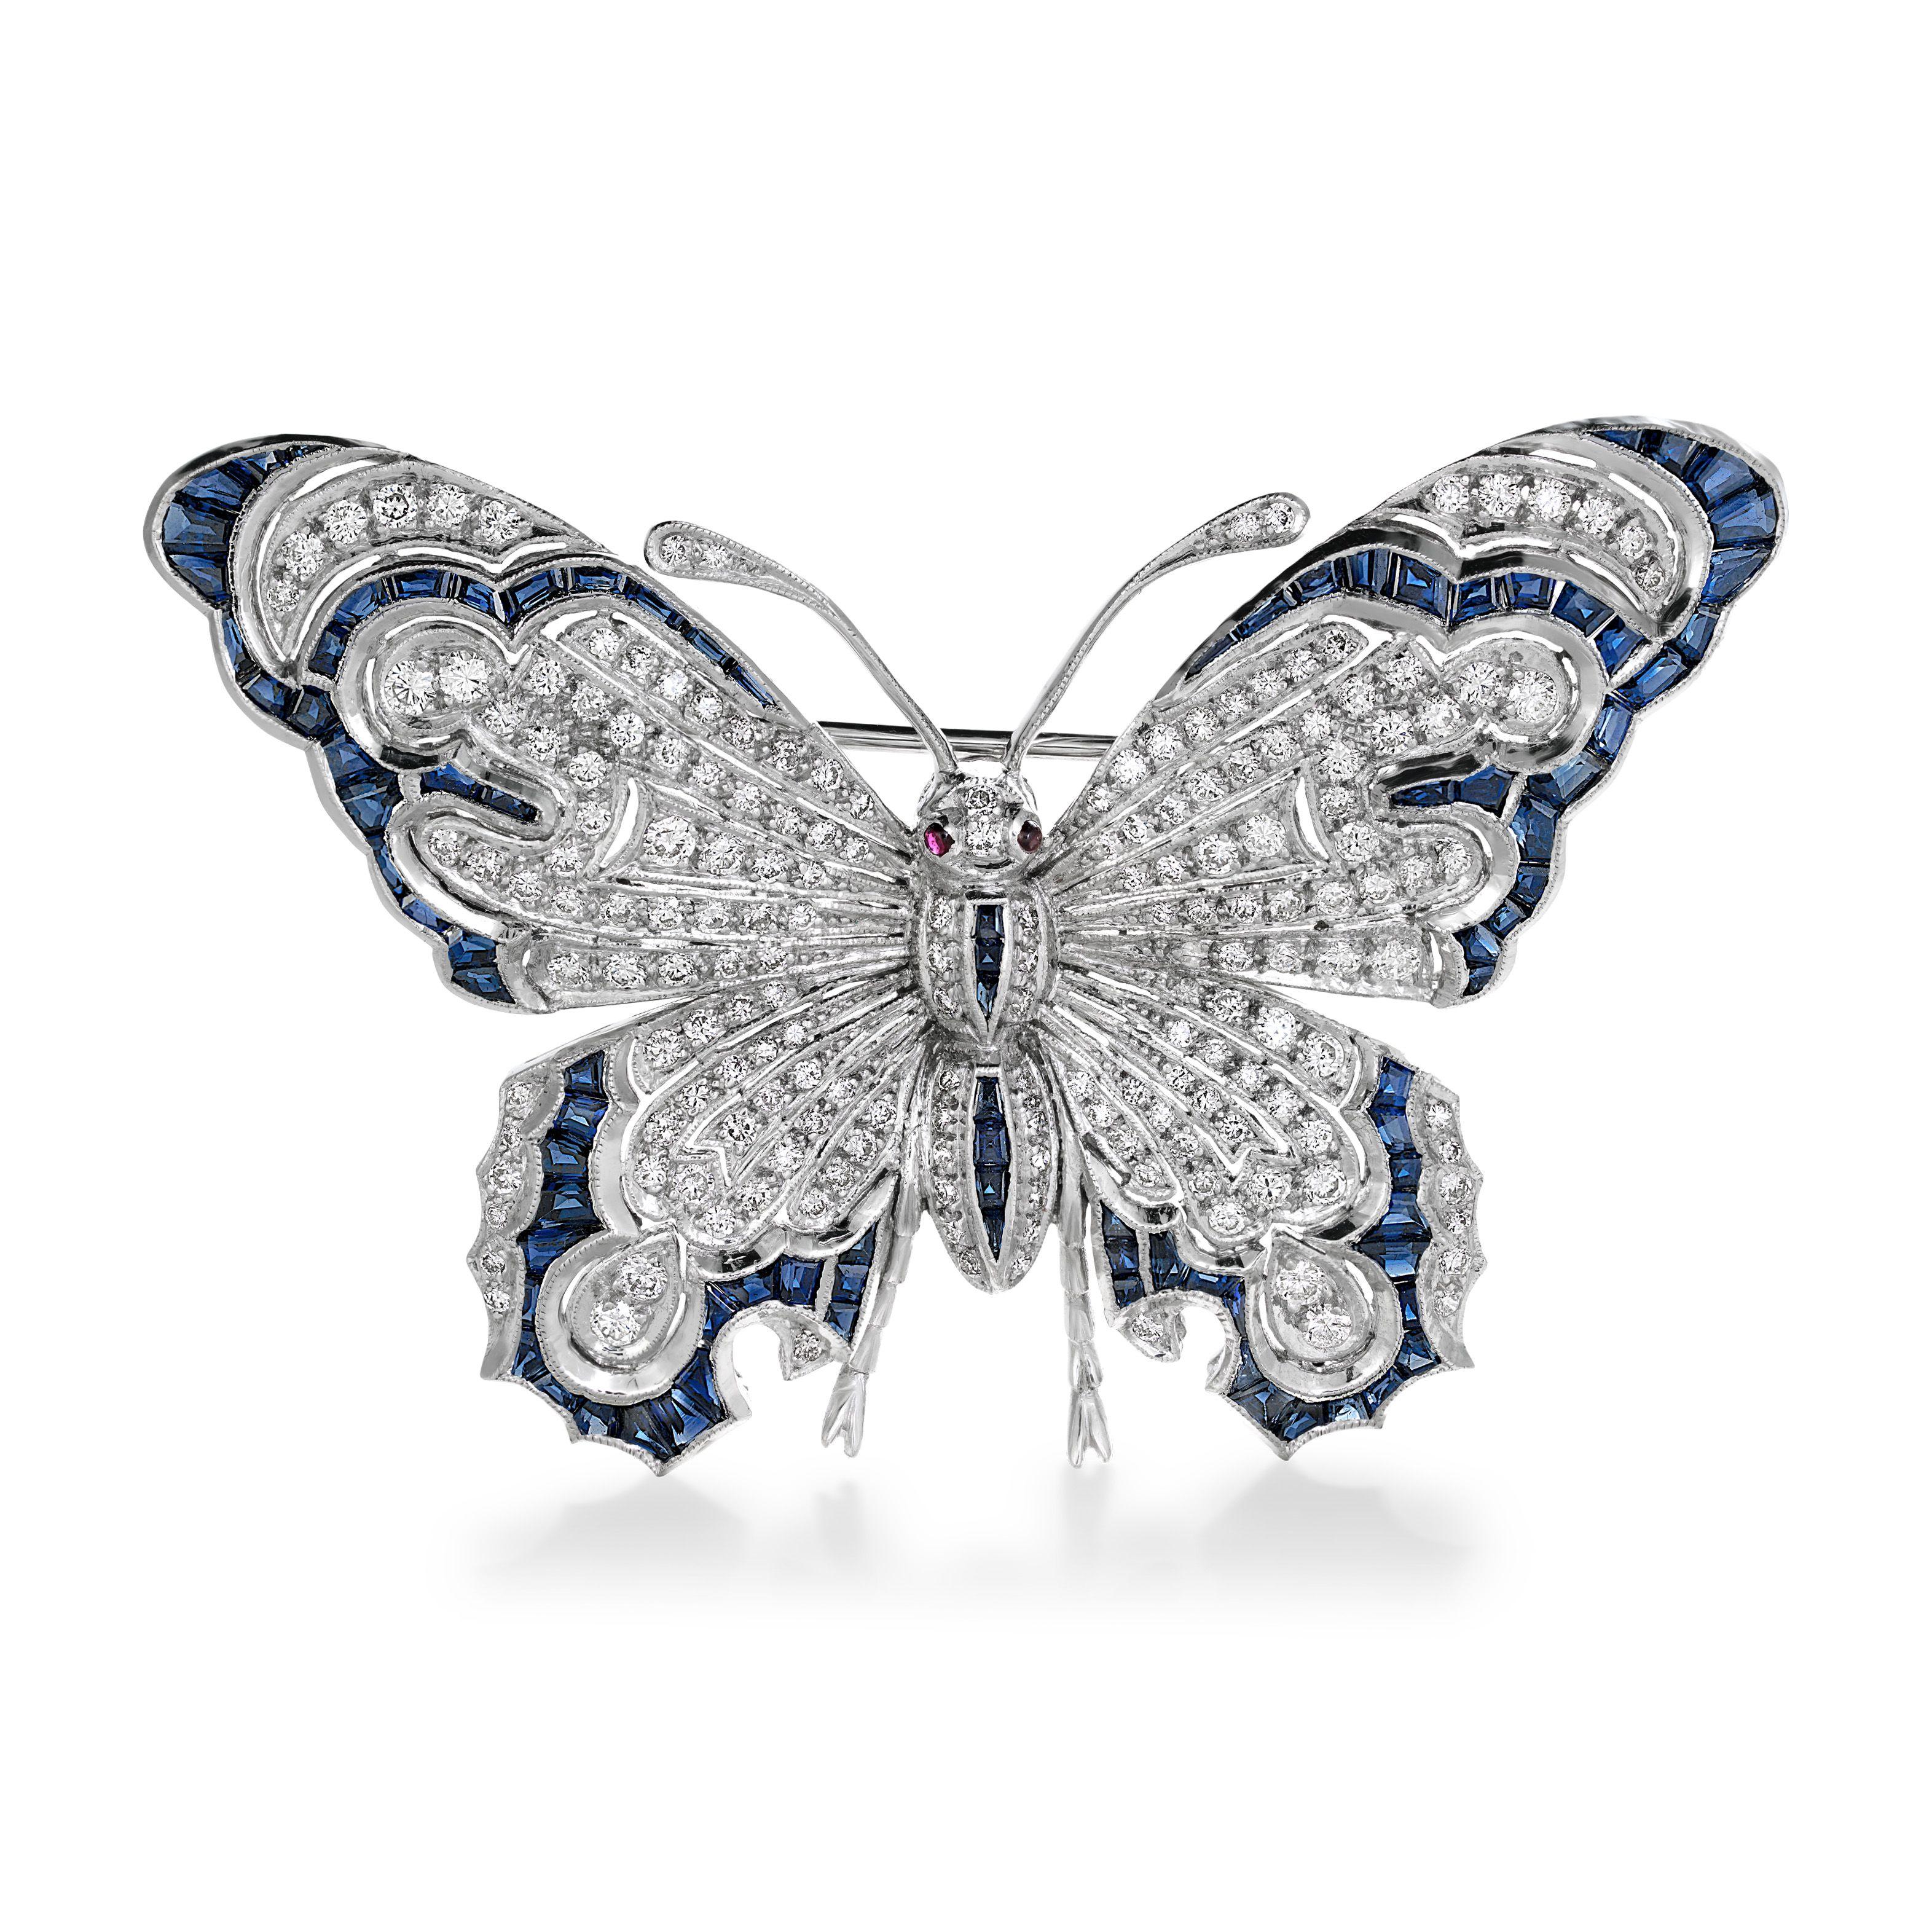 Simply Magnificent! Finely detailed Blue Sapphire and Diamond Art Deco Revival Butterfly Brooch. Hand set with 95 Calibrated Baguette Blue Sapphires, approx. 3.30tcw and 182 Brilliant-cut Diamonds, approx. 1.84tcw with 2 Cabochon Rubies eyes. Total